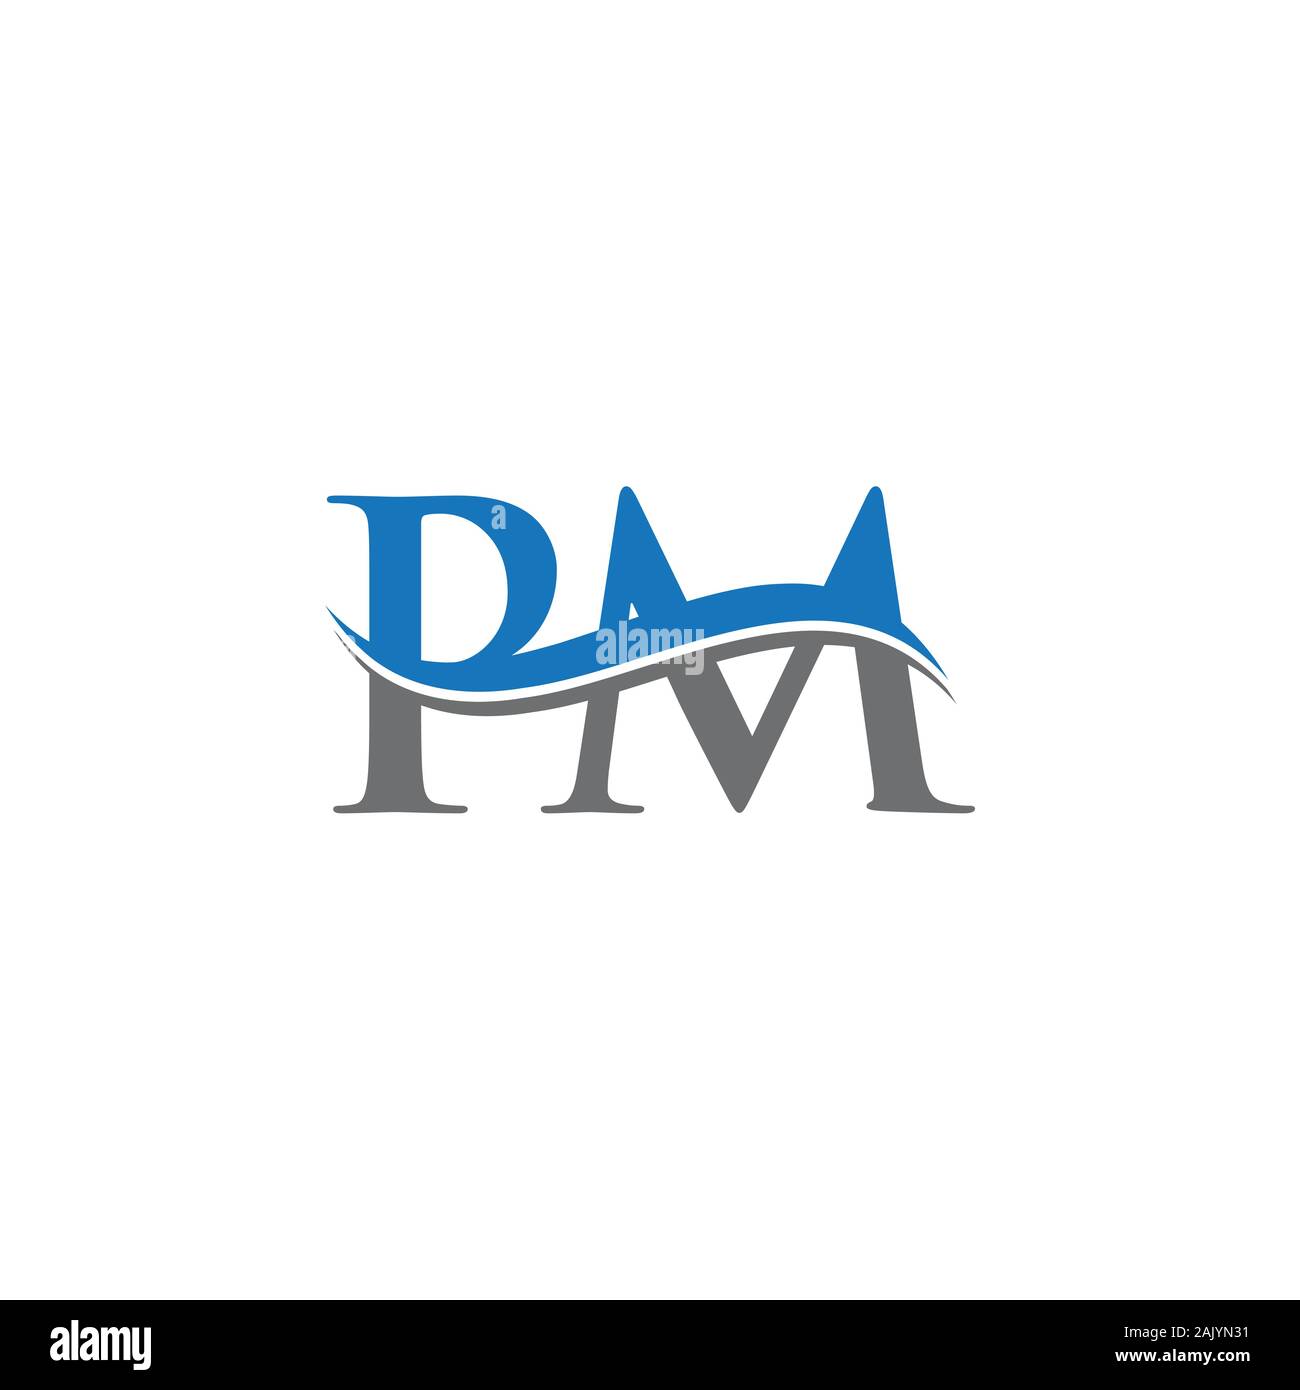 Initial Letter PM Logo Template Design Royalty Free Cliparts, Vectors, And  Stock Illustration. Image 109606423.